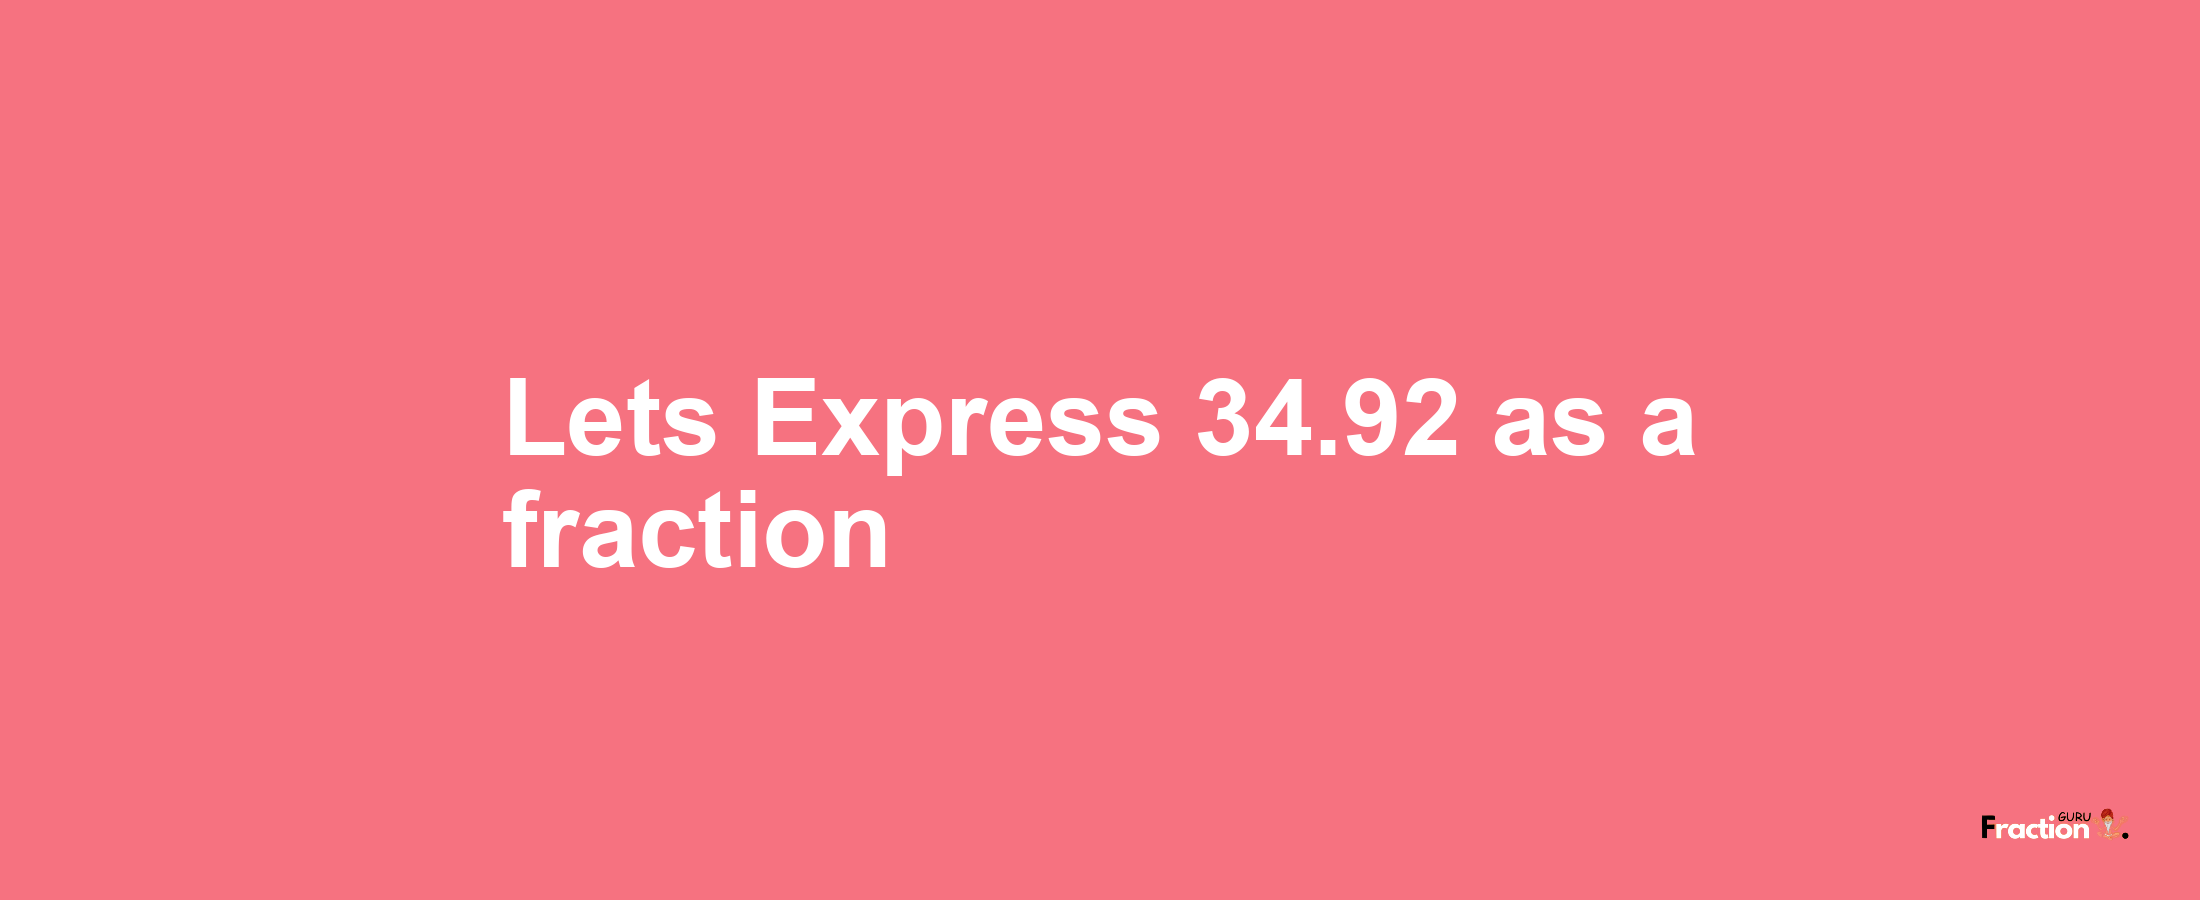 Lets Express 34.92 as afraction